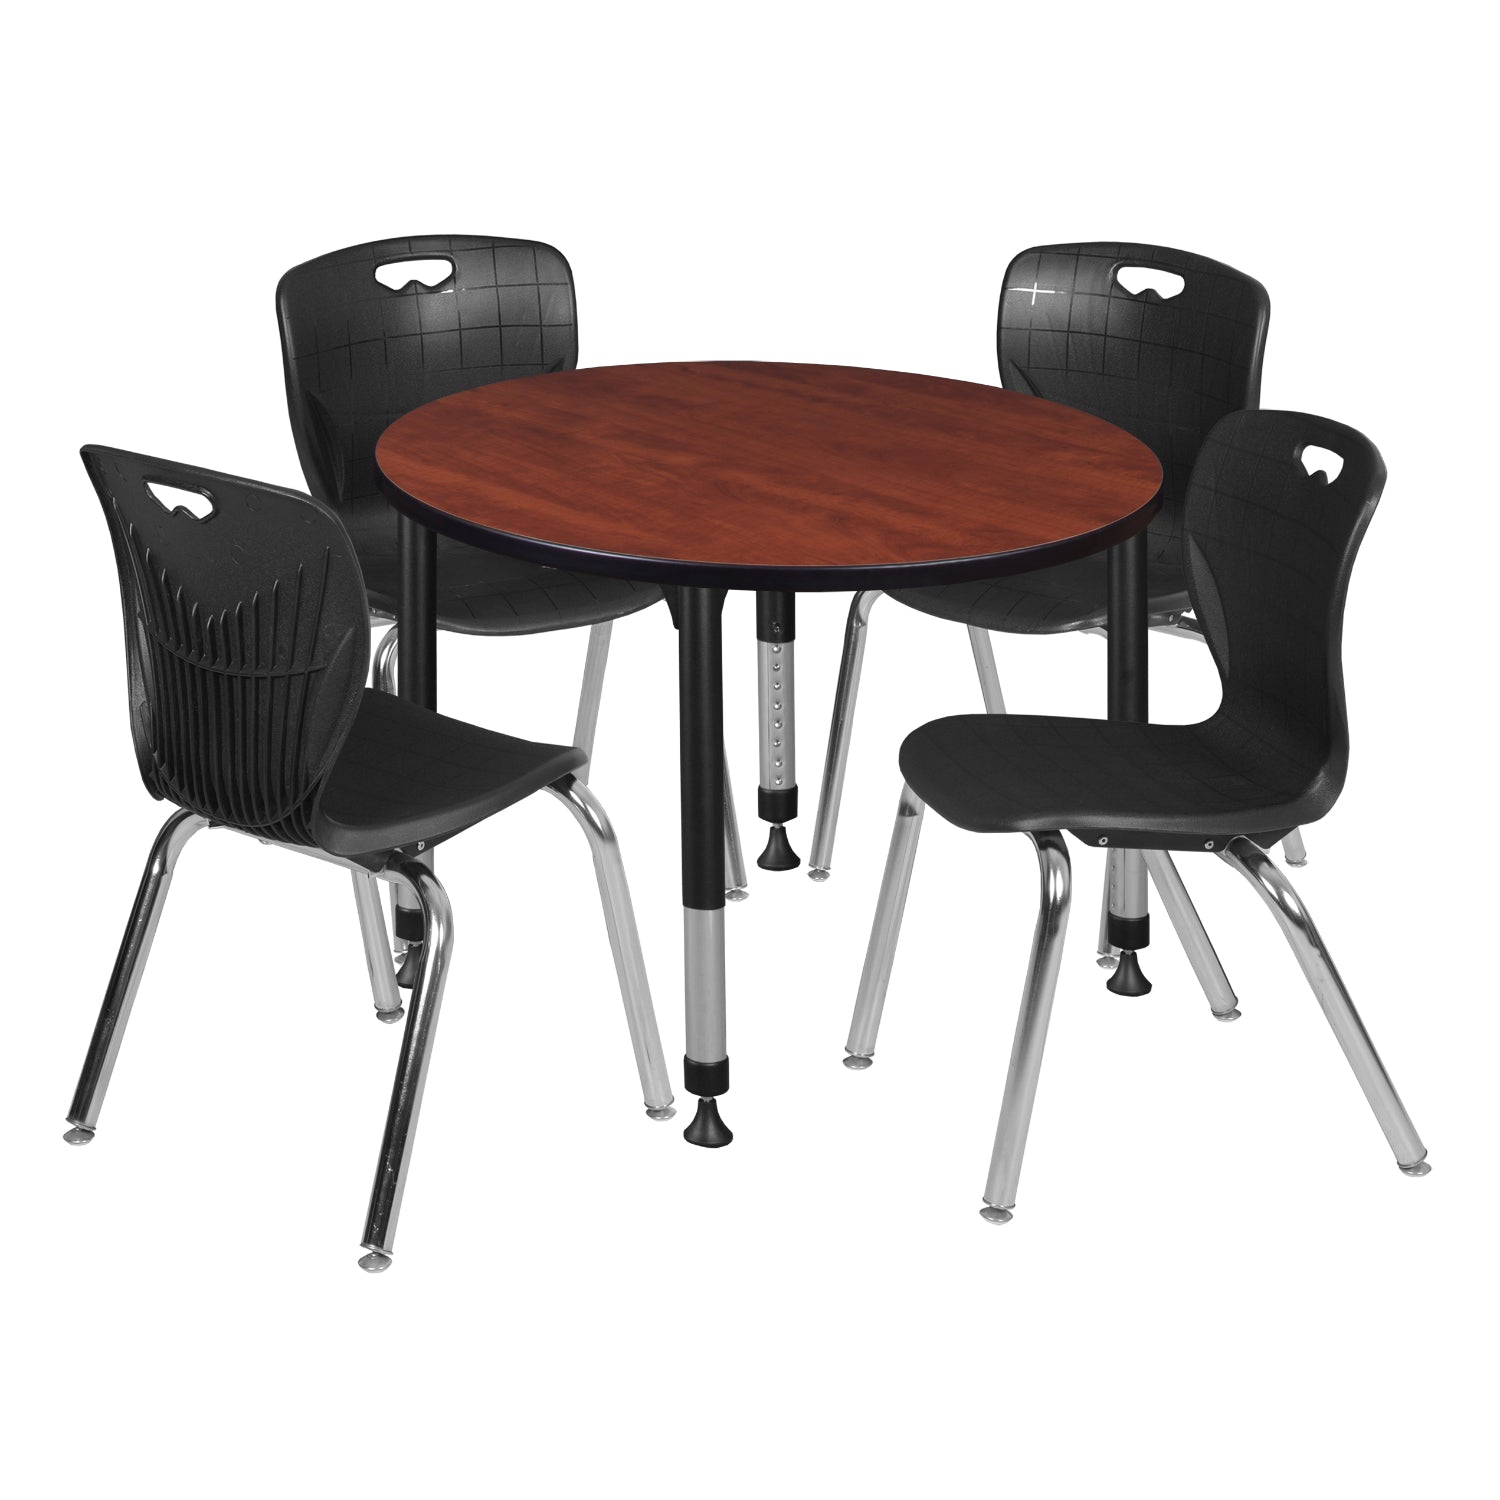 Kee Classroom Table and Chair Package, Kee 42" Round Adjustable Height Table with 4 Andy 18" Stack Chairs